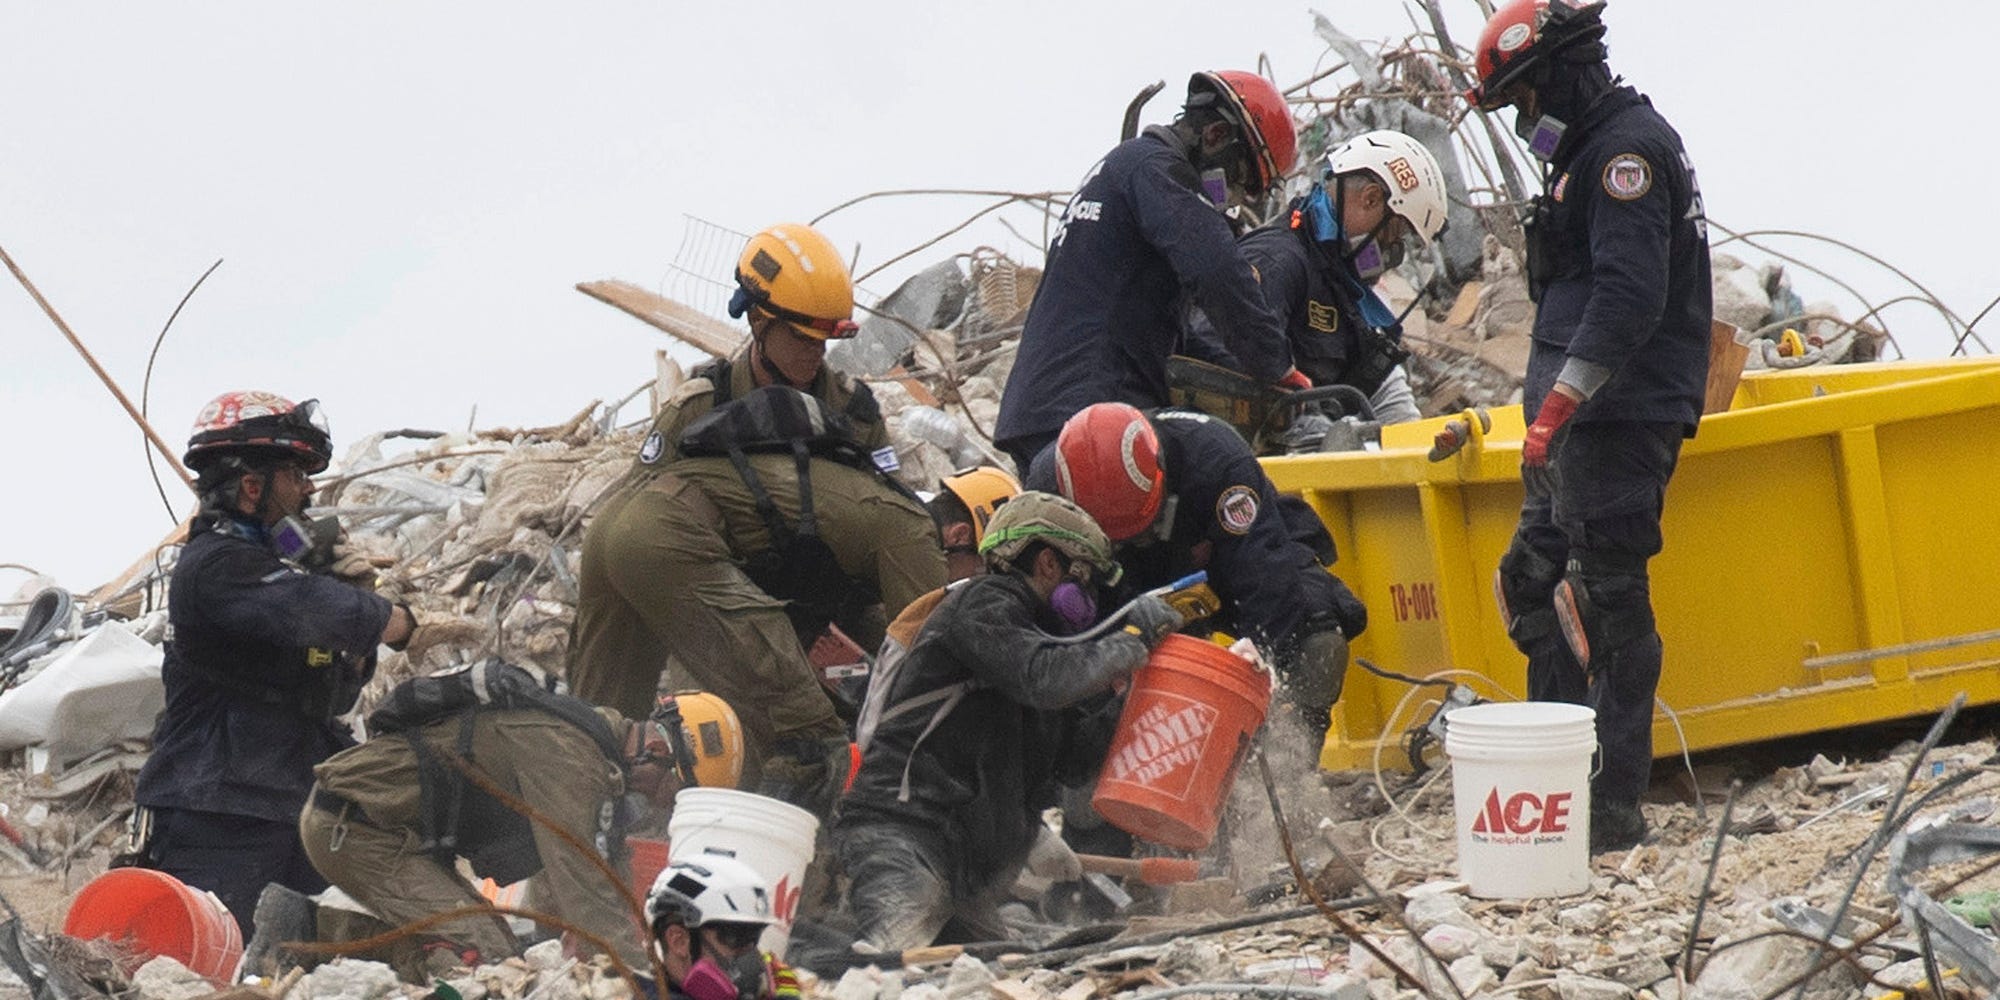 Search and Rescue teams look for possible survivors and to recover remains in the partially collapsed 12-story Champlain Towers South condo building on June 29, 2021 in Surfside, Florida.